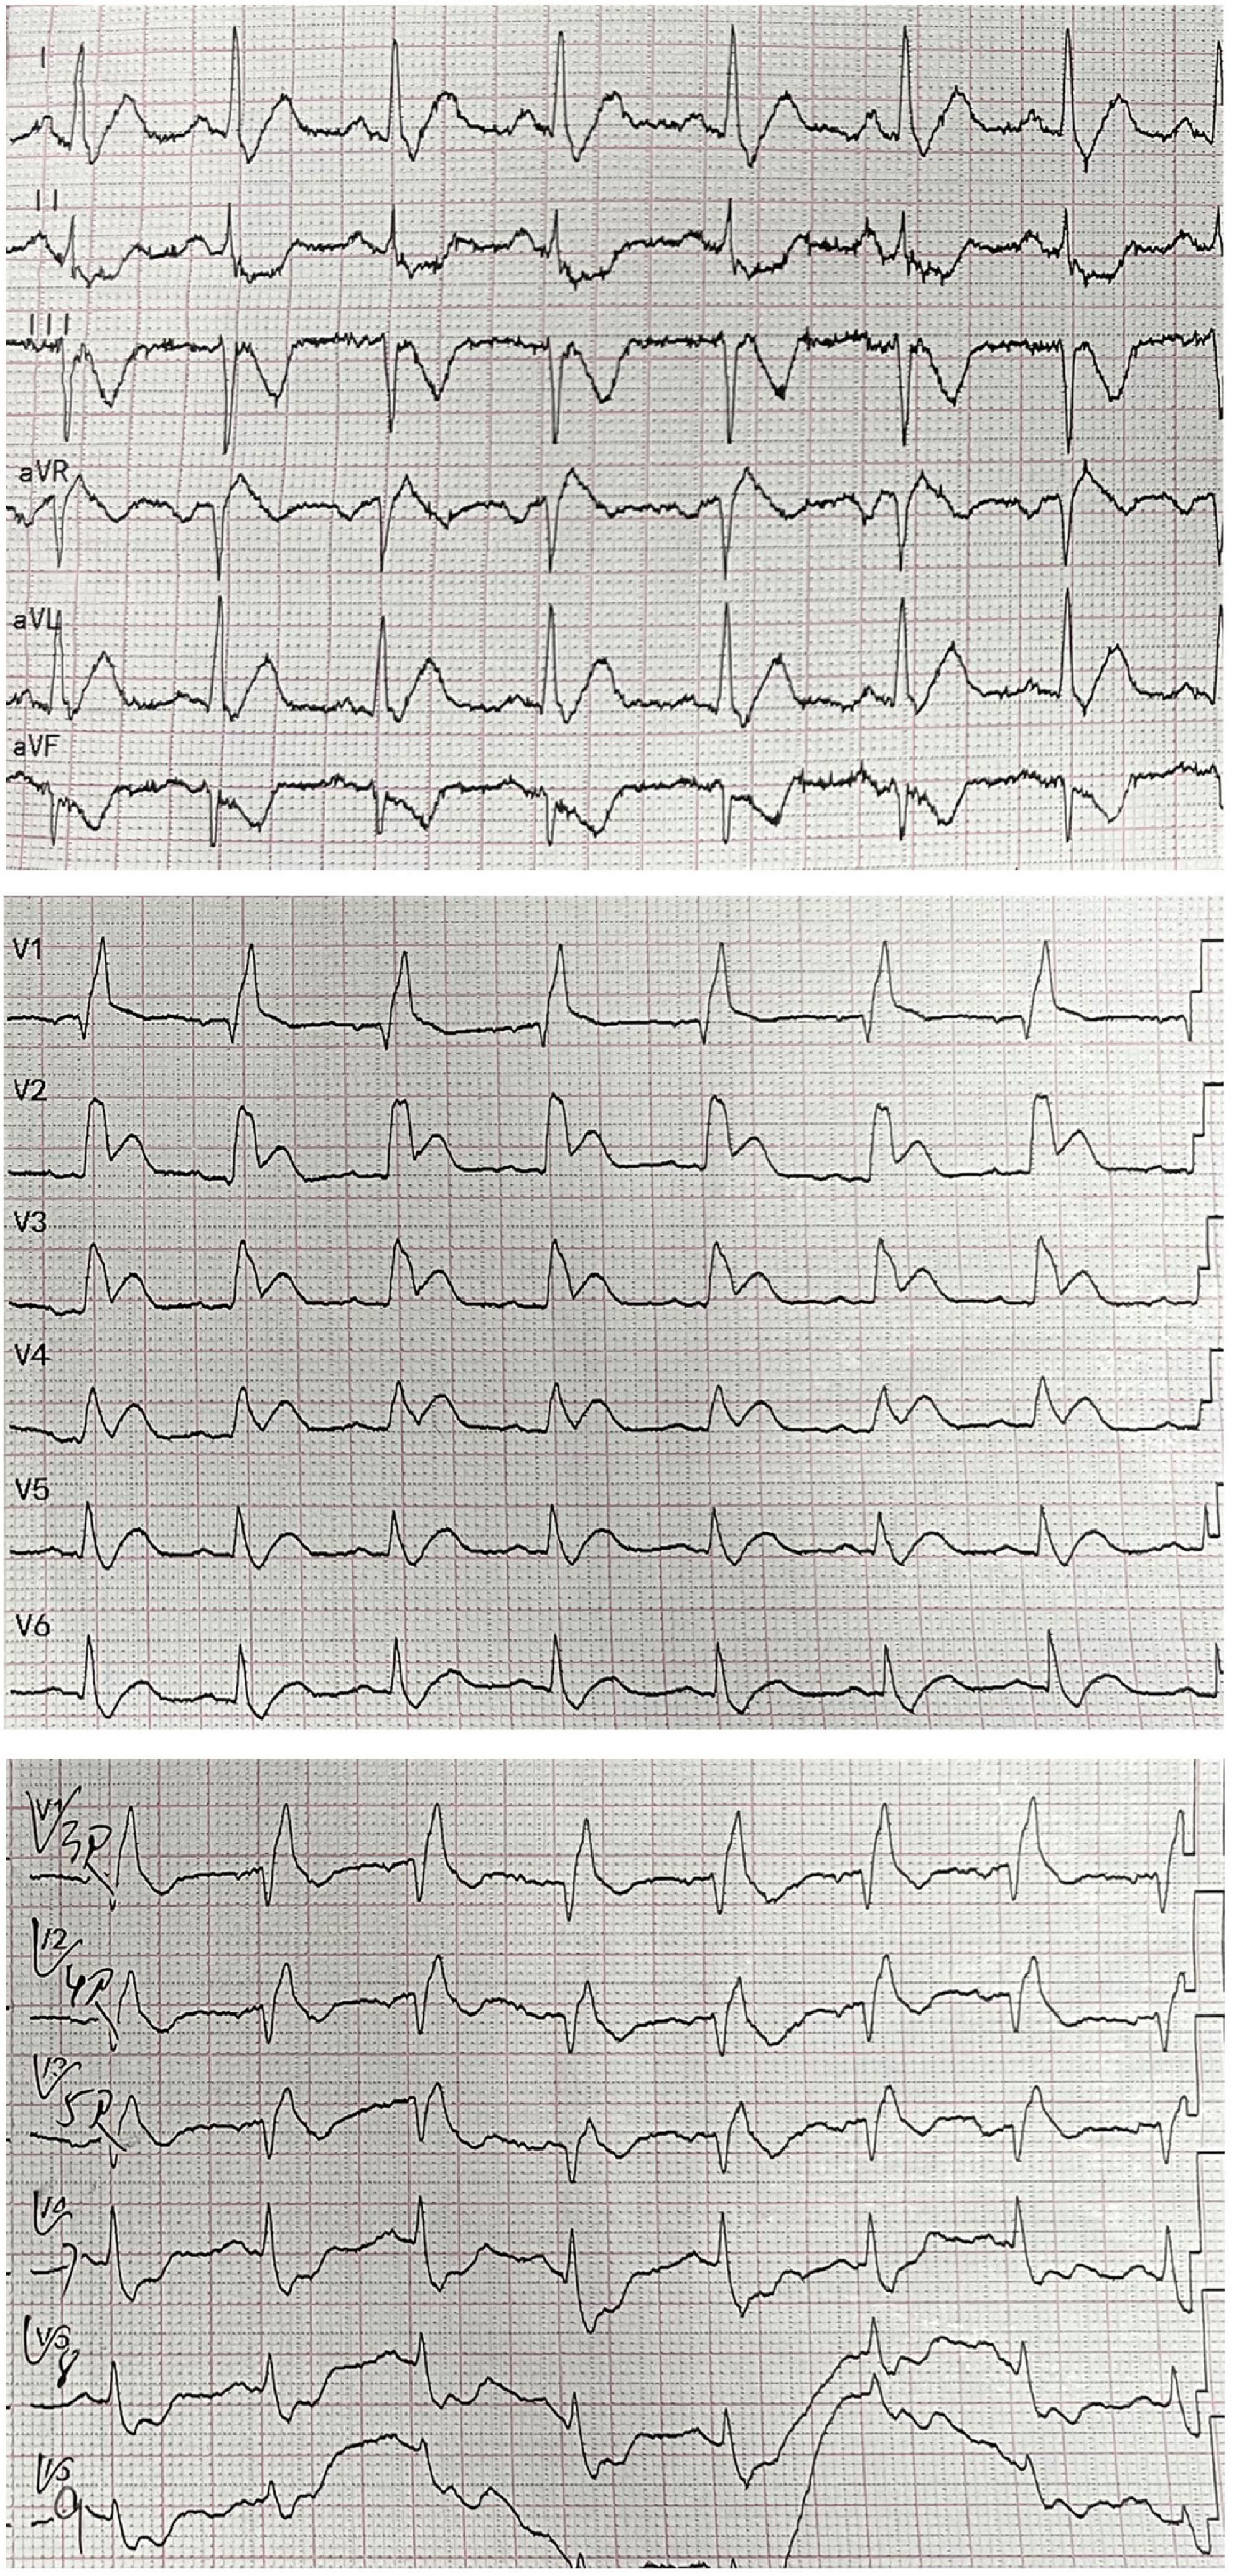 Case report: Treatment of a patient with STEMI and cardiogenic shock caused by RCA originating from LAD